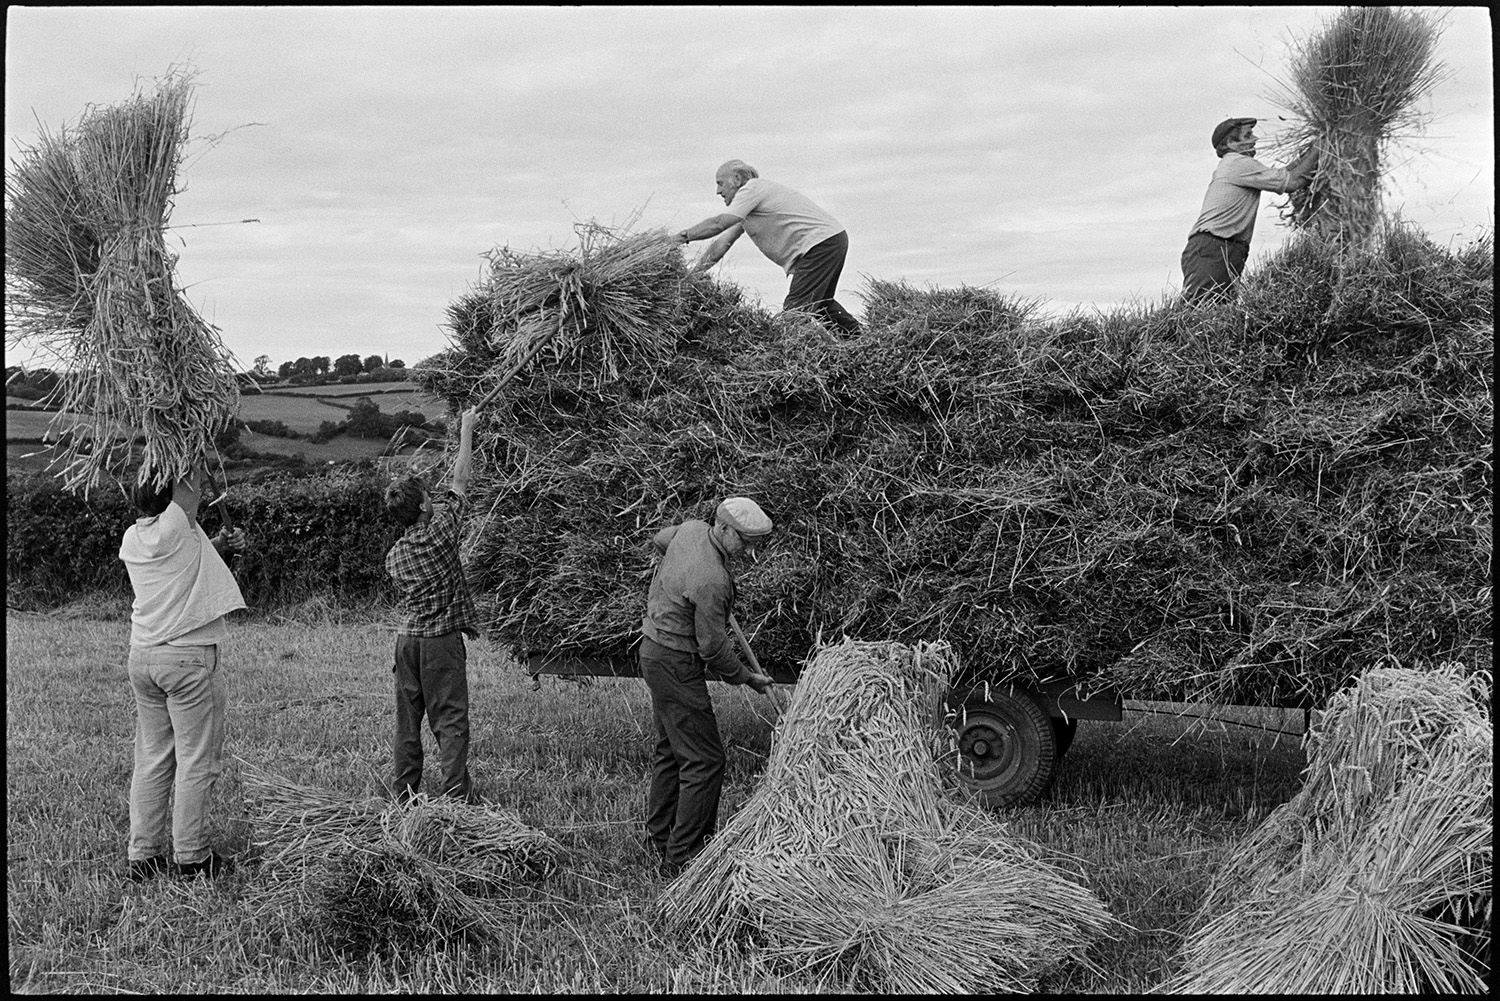 Men loading nitches of wheat onto trailer, resting on their pitchforks. Farmer on motorbike. 
[Men, possibly from the Down family, loading bundles of wheat onto a trailer in a  field at Spittle, Chulmleigh.]